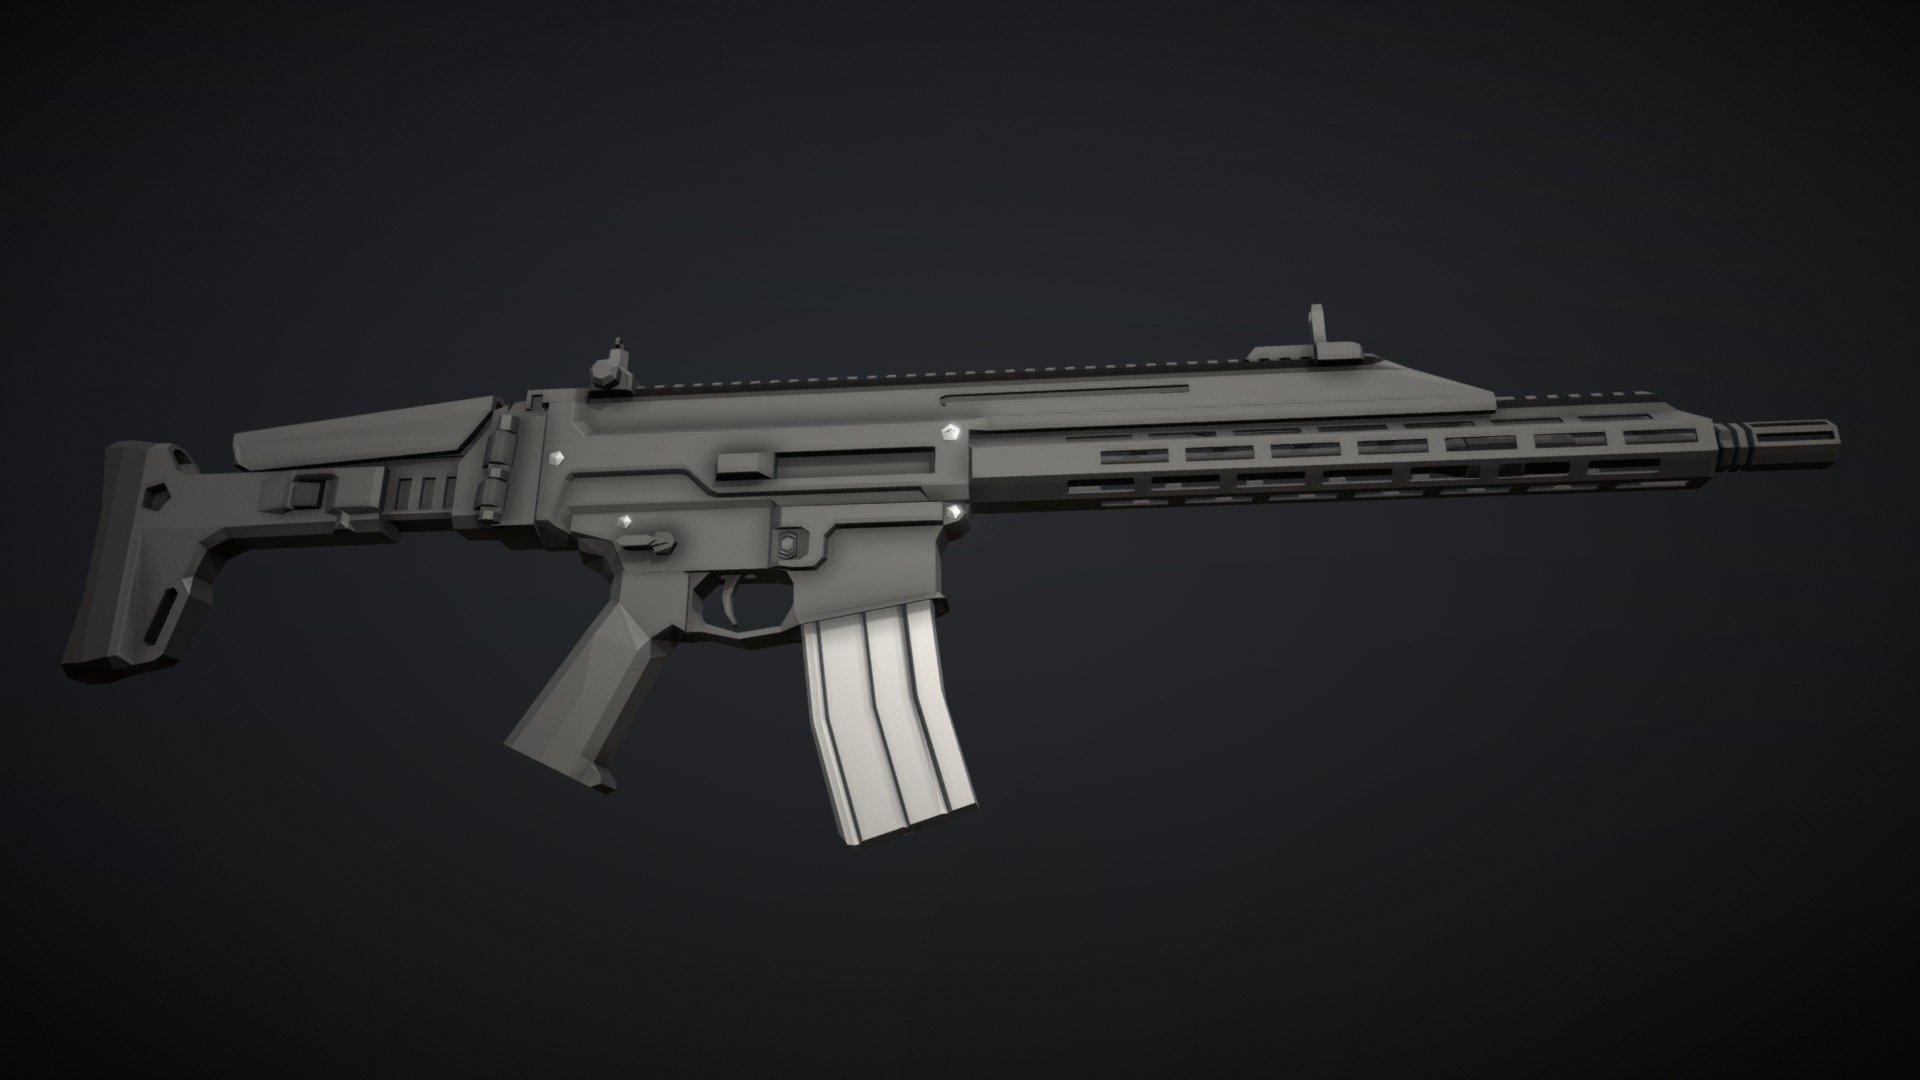 Low-Poly model of the Tinck Arms Perun X-16, an assault rifle intended for the sport shooting/competition shooting market, designed to be compatible with as many AR-15 components as possible, while still being an improvement over the AR-15, with lower recoil, higher reliability, use with different calibers, as well as easy use with a suppressor.

This rifle is compatible with SCAR stocks, so keep that in mind when making a game that has weapon modification. also, this gun is compatible with any AR-15 handguards that have an attachment rail on top 3d model